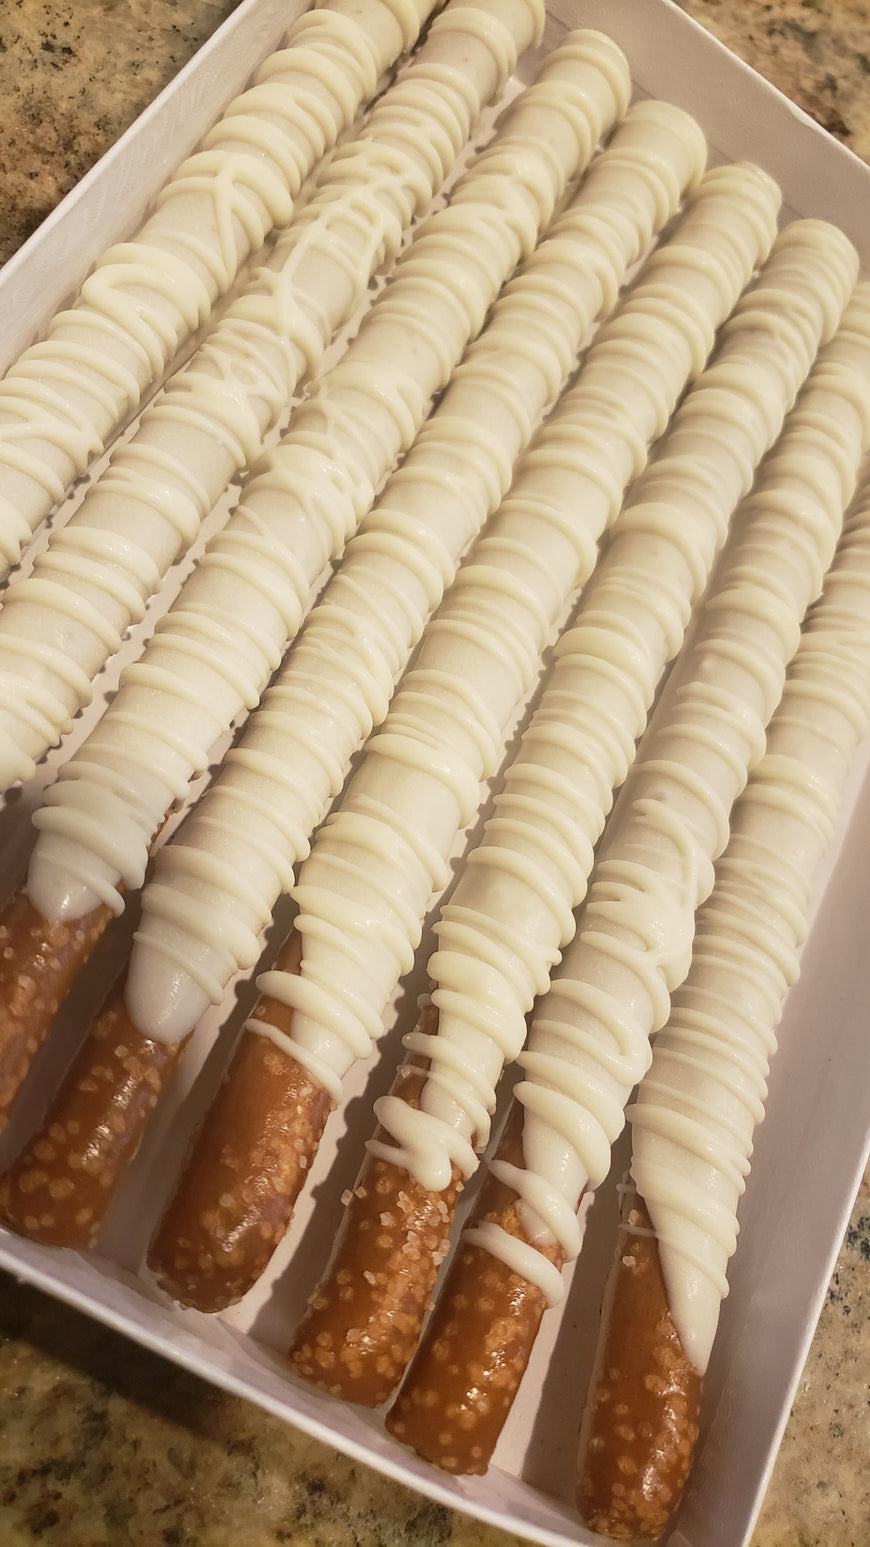 Gourmet White Chocolate Covered Pretzels